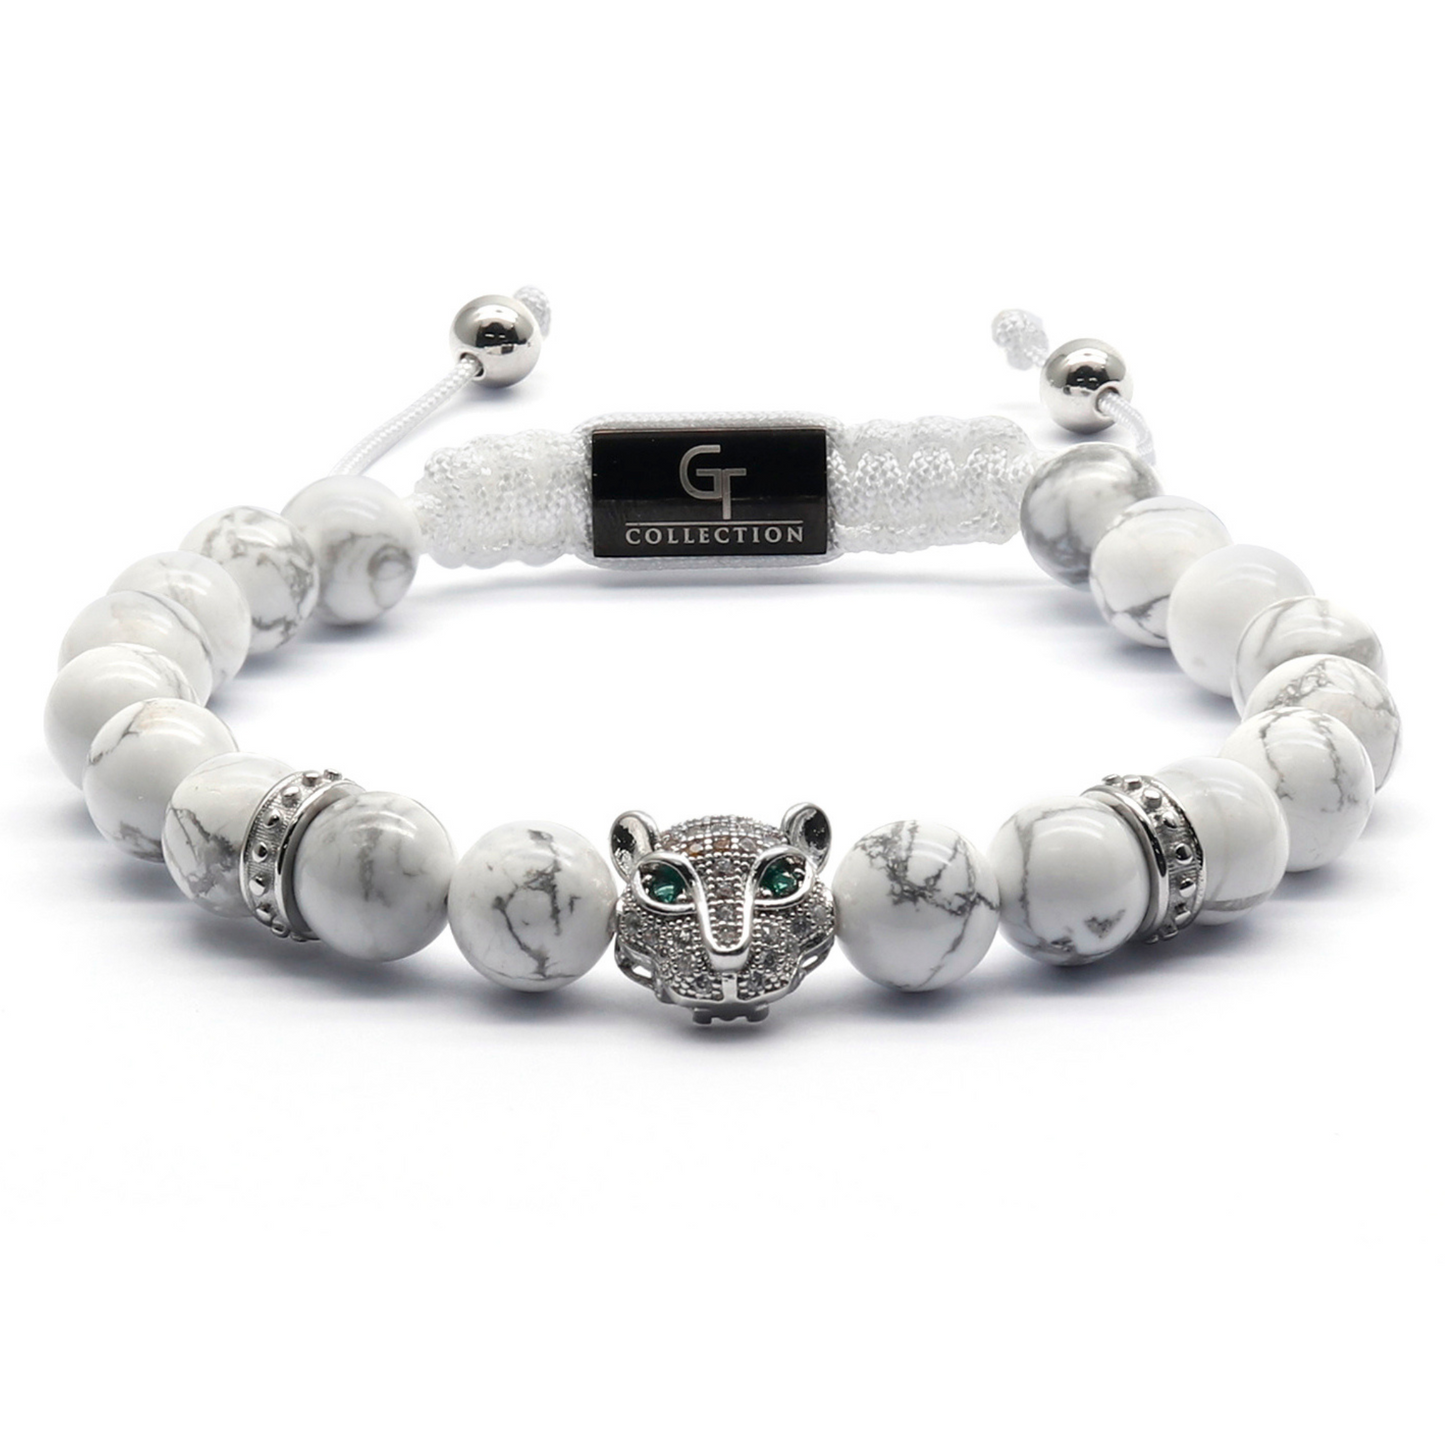 Men's WHITE HOWLITE Bracelet With Silver LEOPARD Head - One Size Fits All